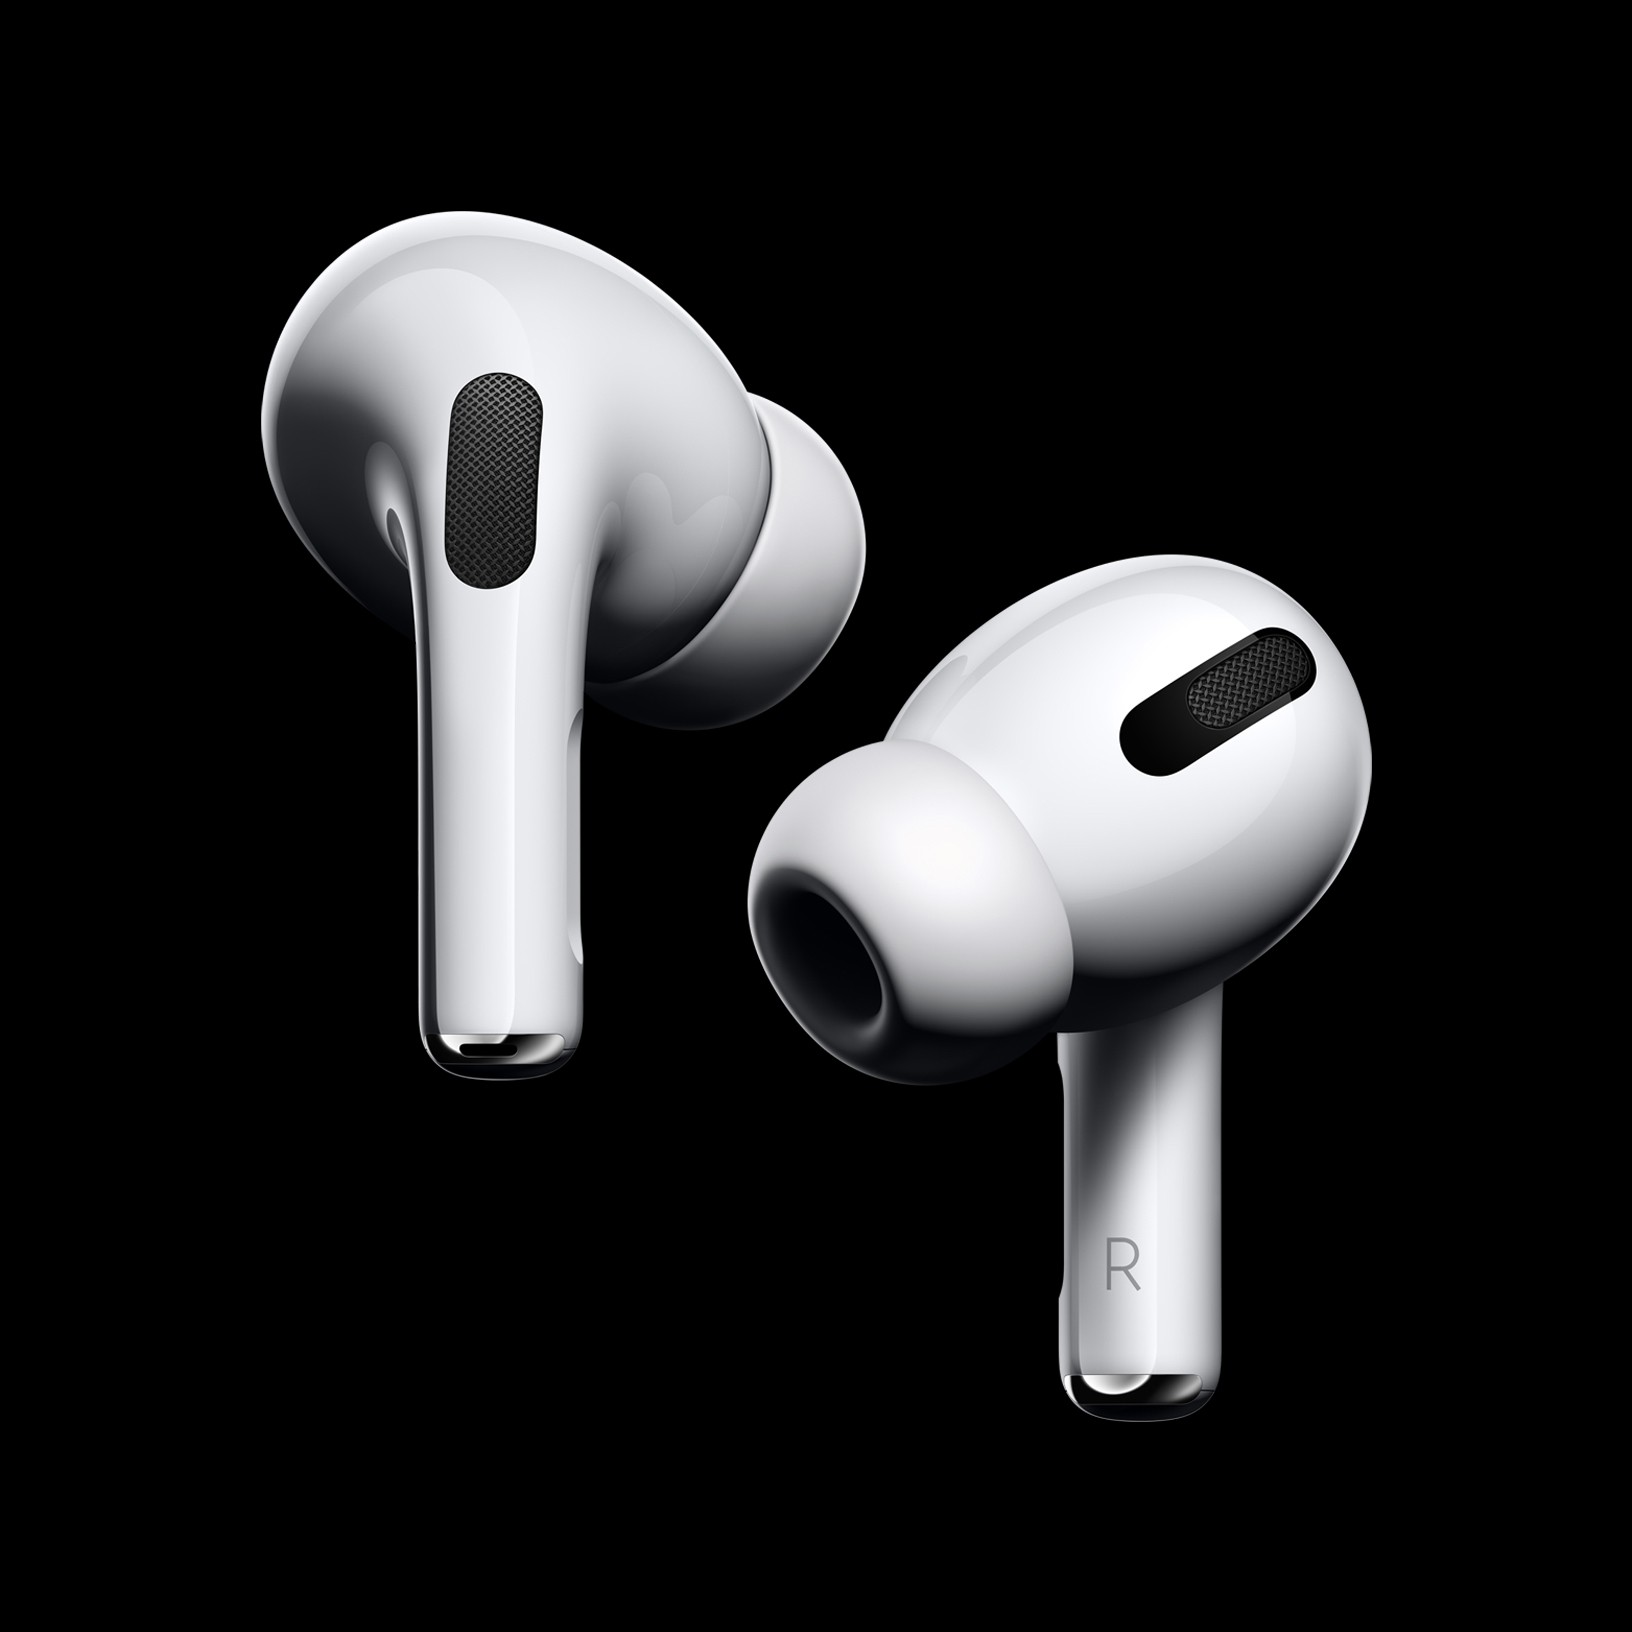 Apple announces airpods pro with active noise cancellation available october 30 528010 2